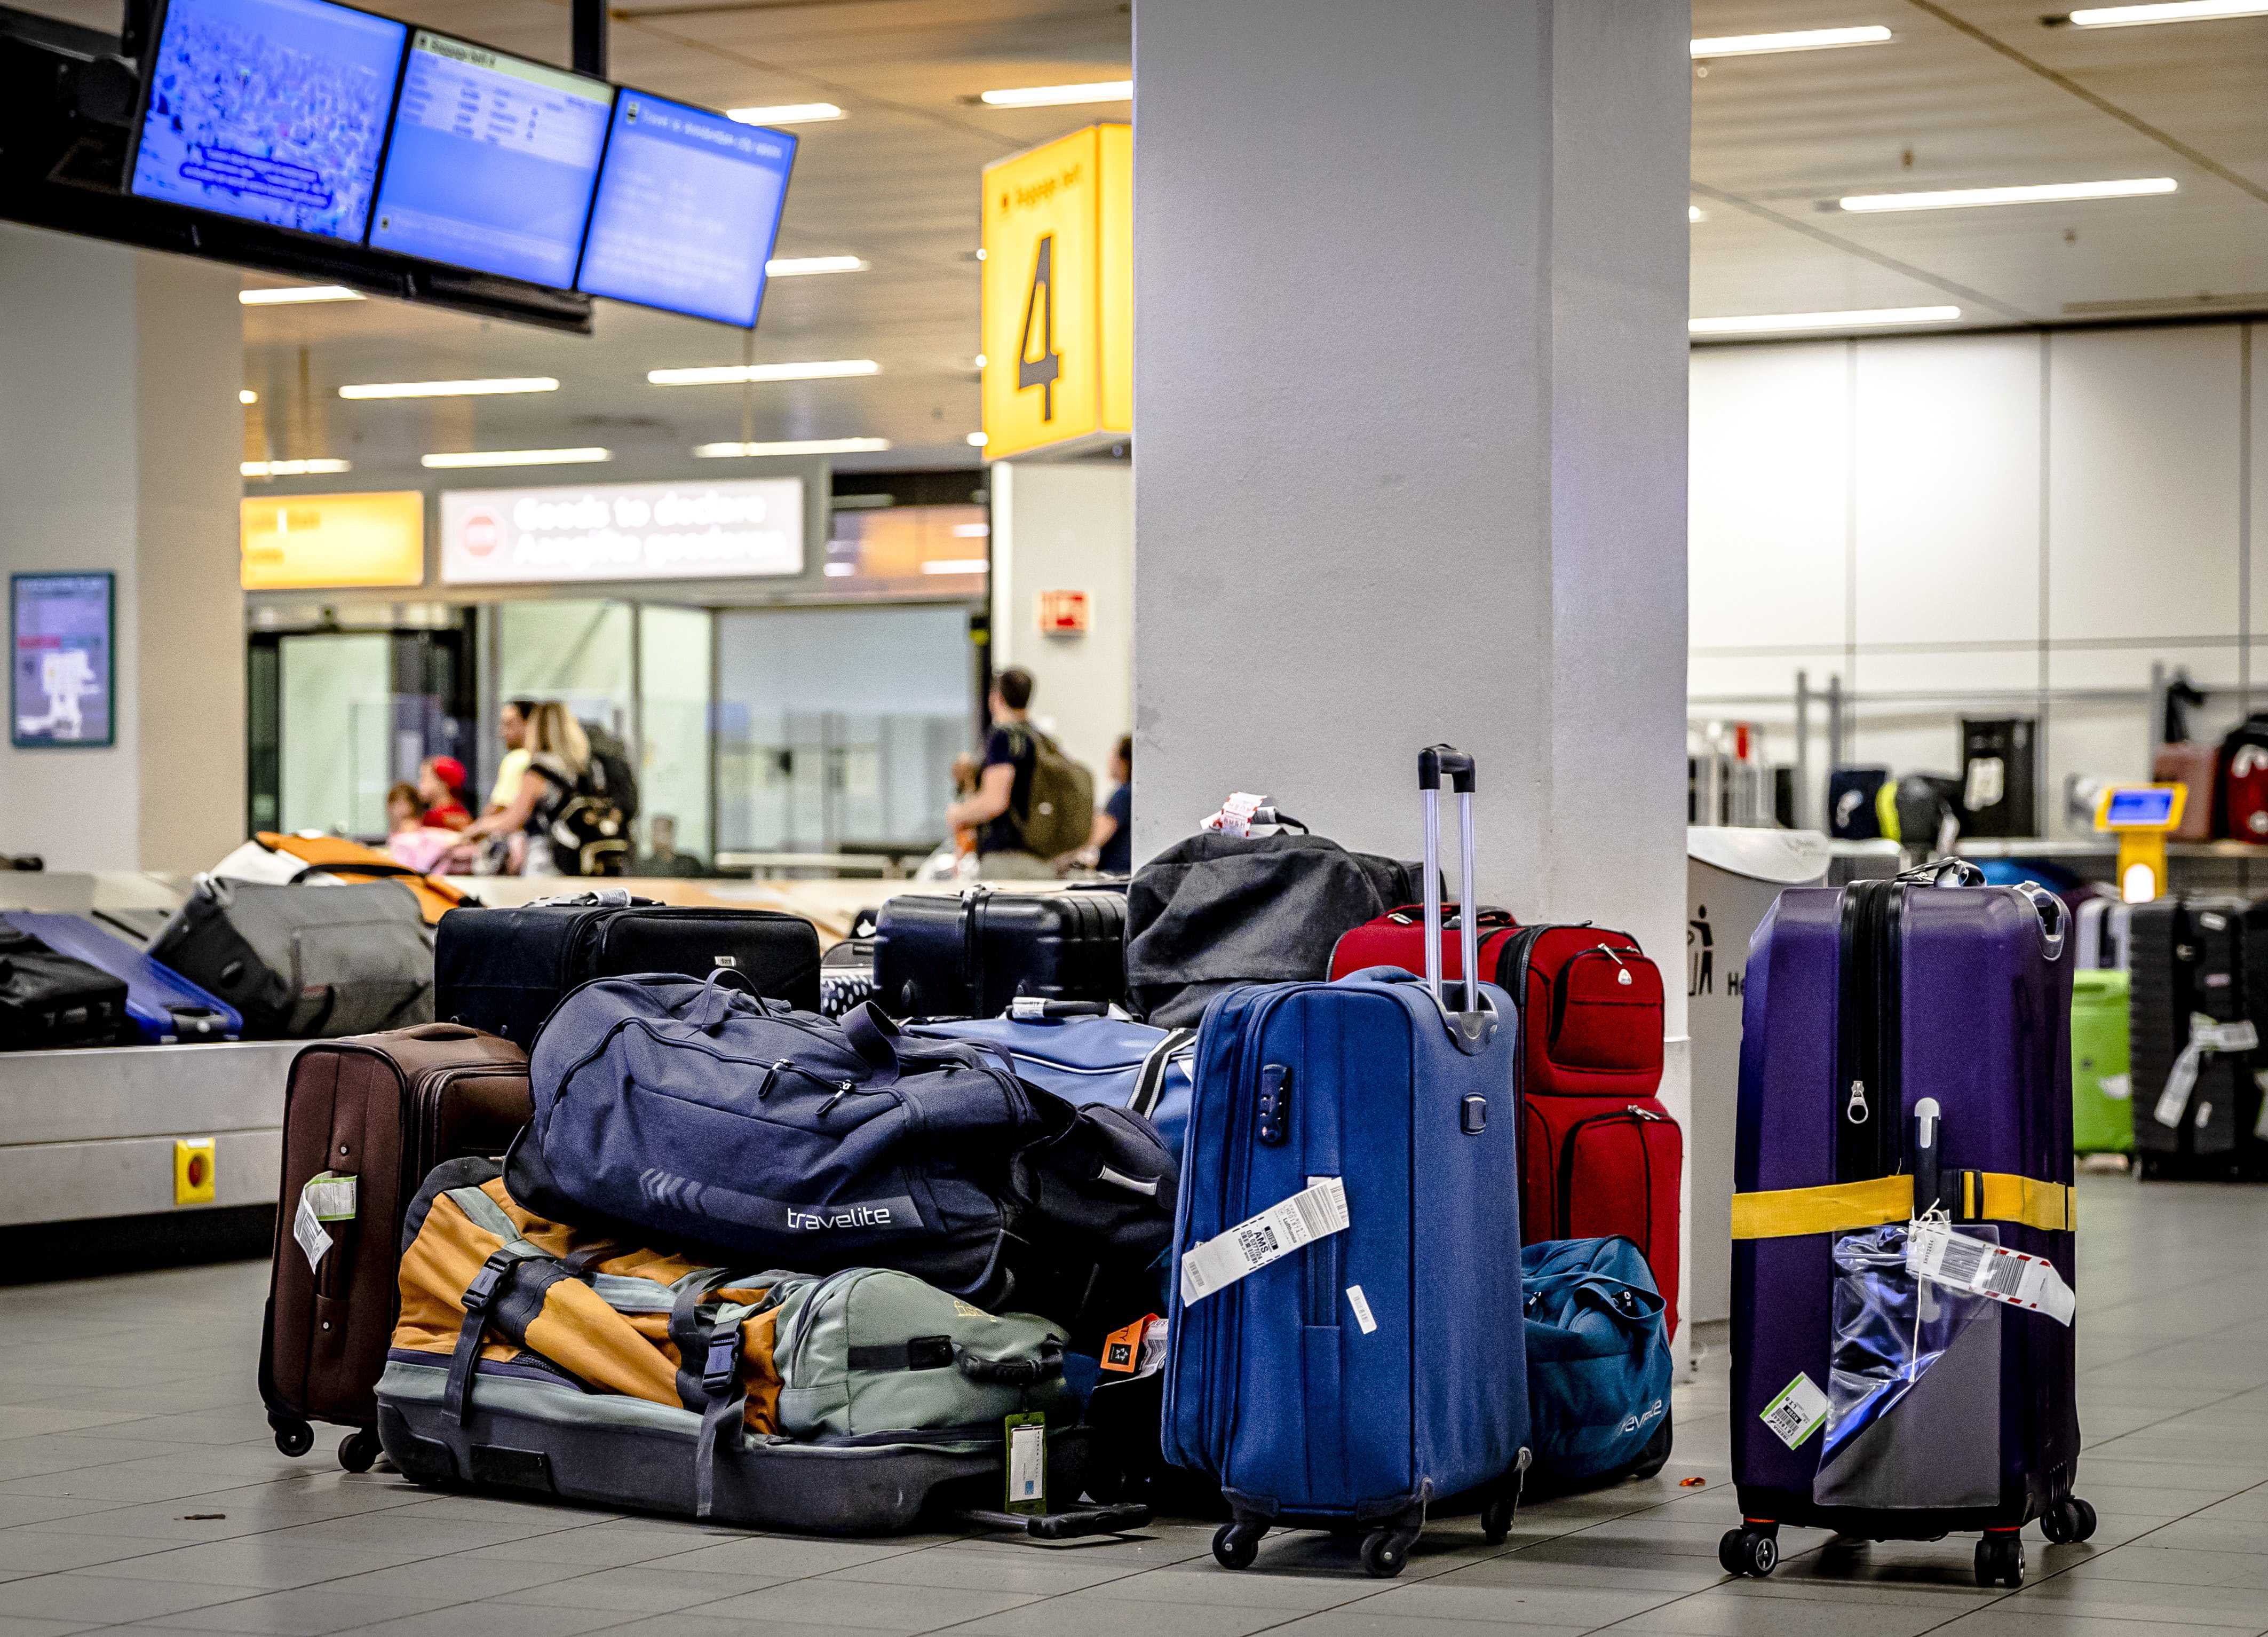 Many airlines have been dealing with lost luggage during the summer travel season